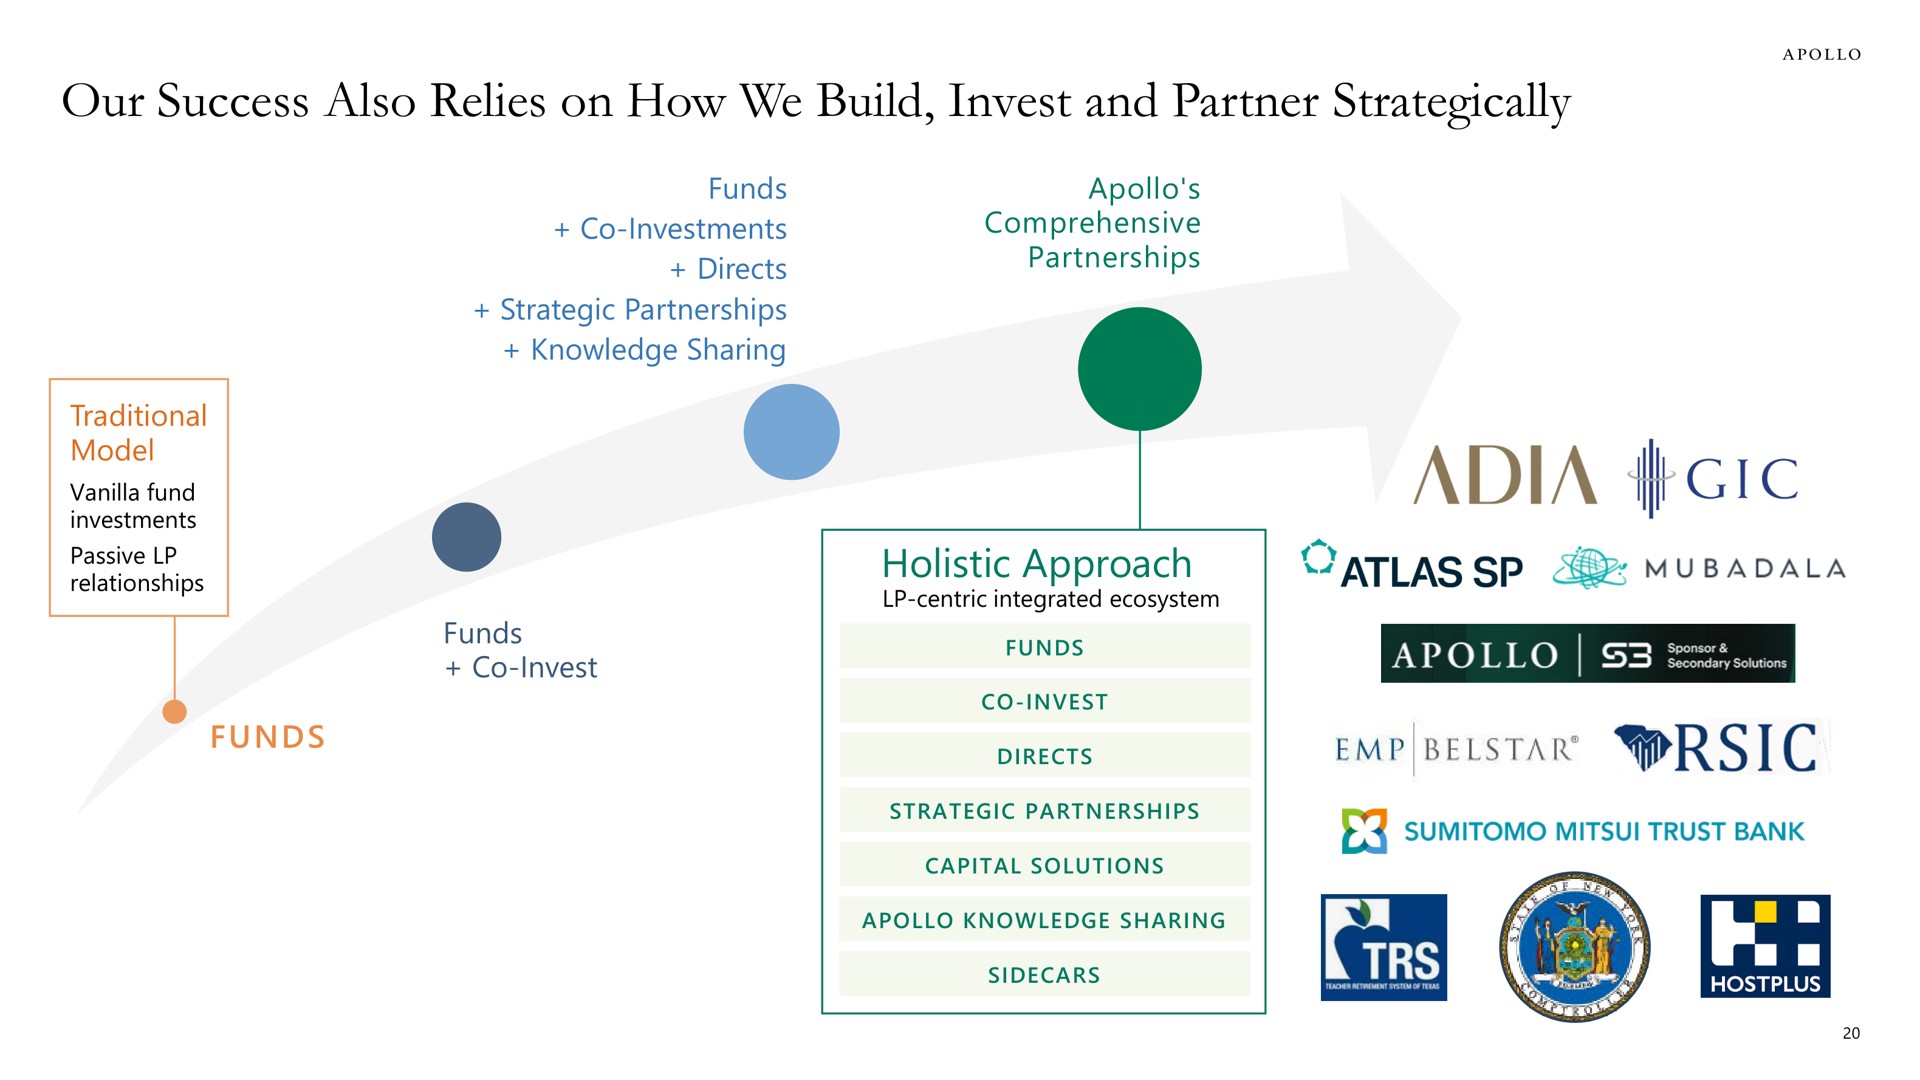 our success also relies on how we build invest and partner strategically relationships holistic approach | Apollo Global Management